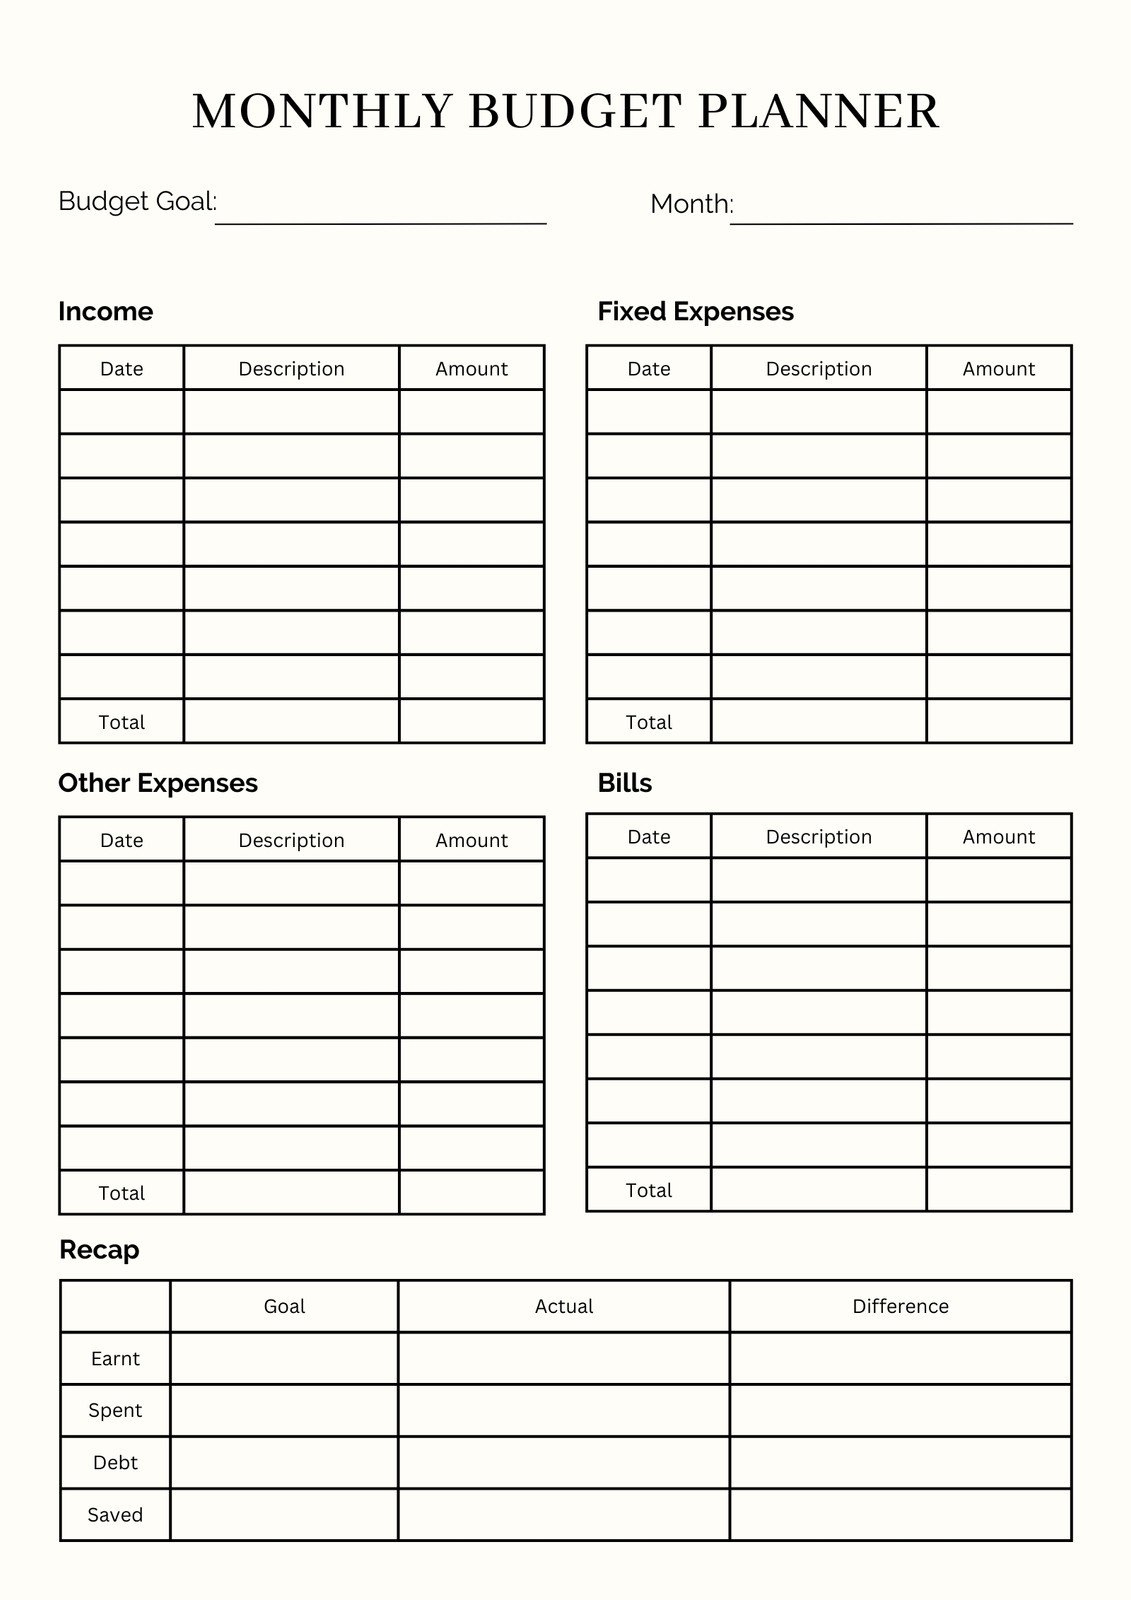 Free And Customizable Budget Templates within Budgeting Charts Free Printable